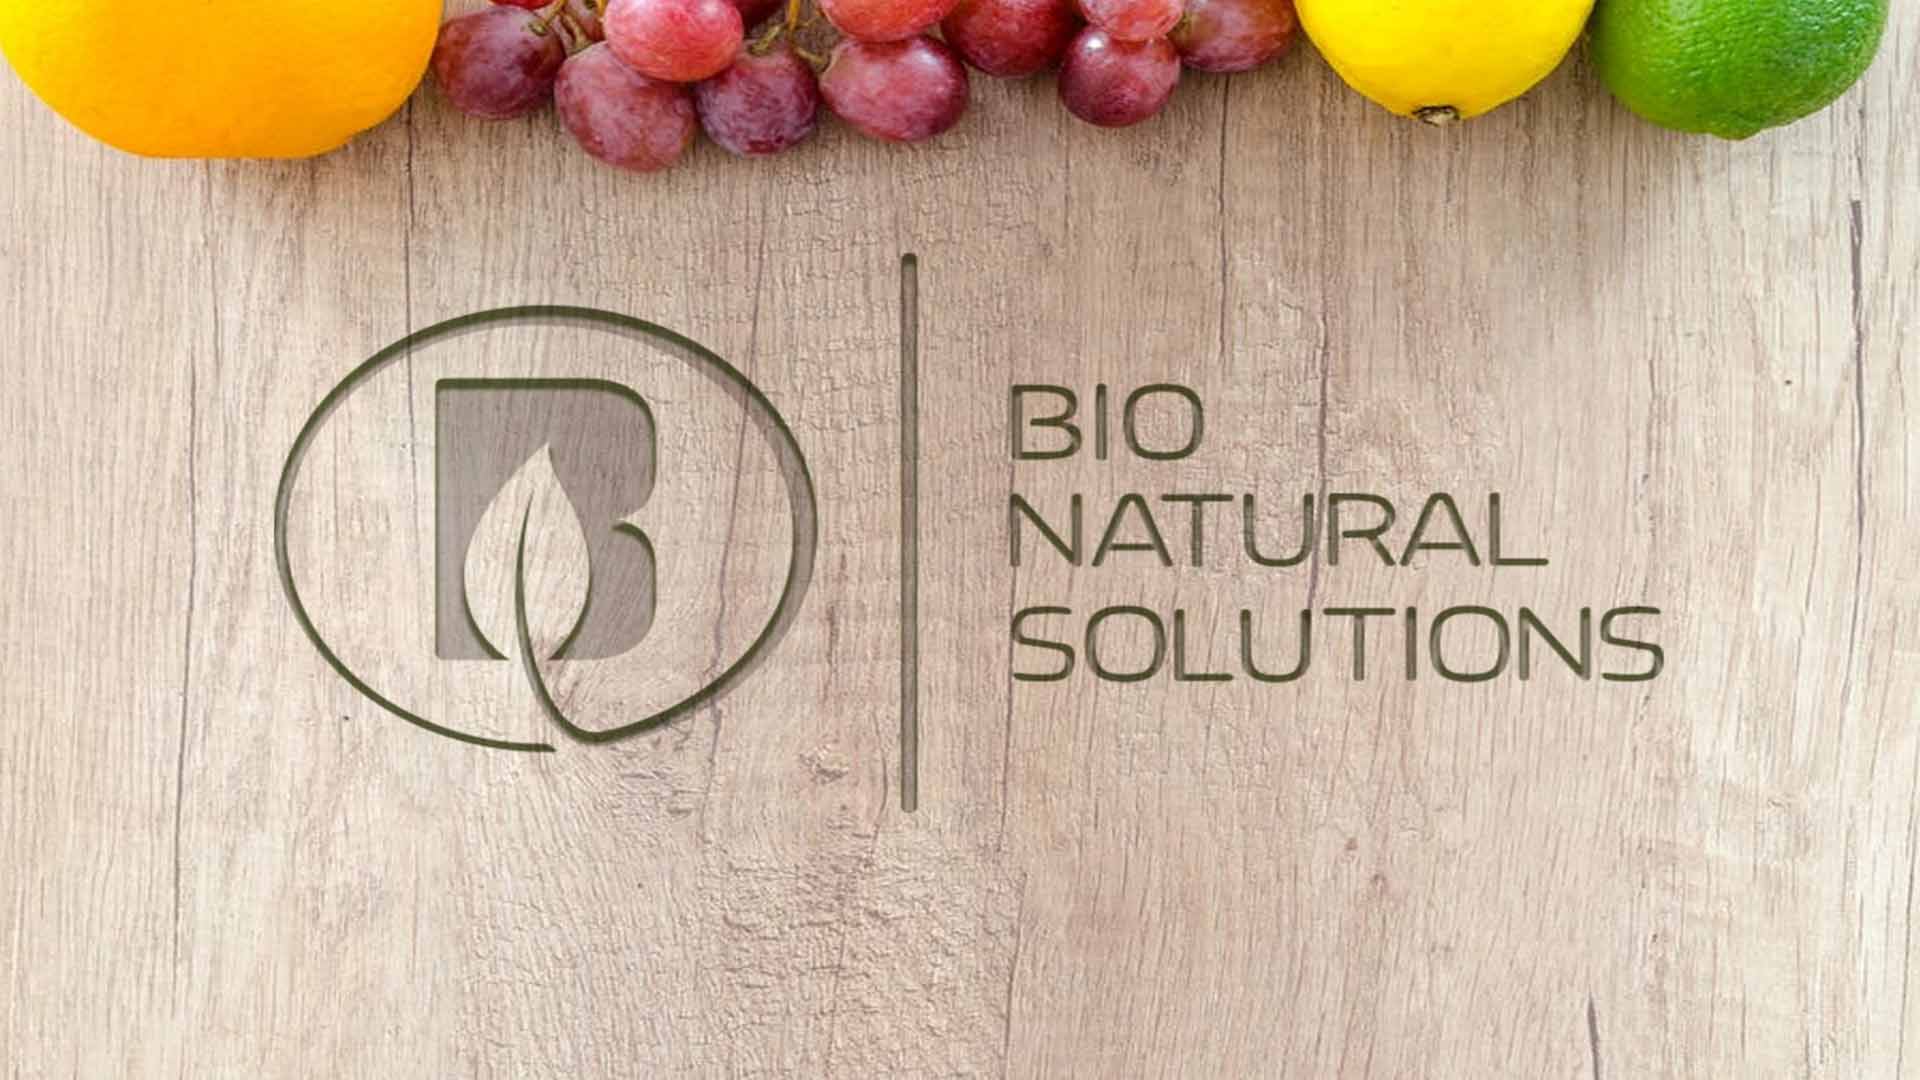 Bio Natural Solutions | Expo Live